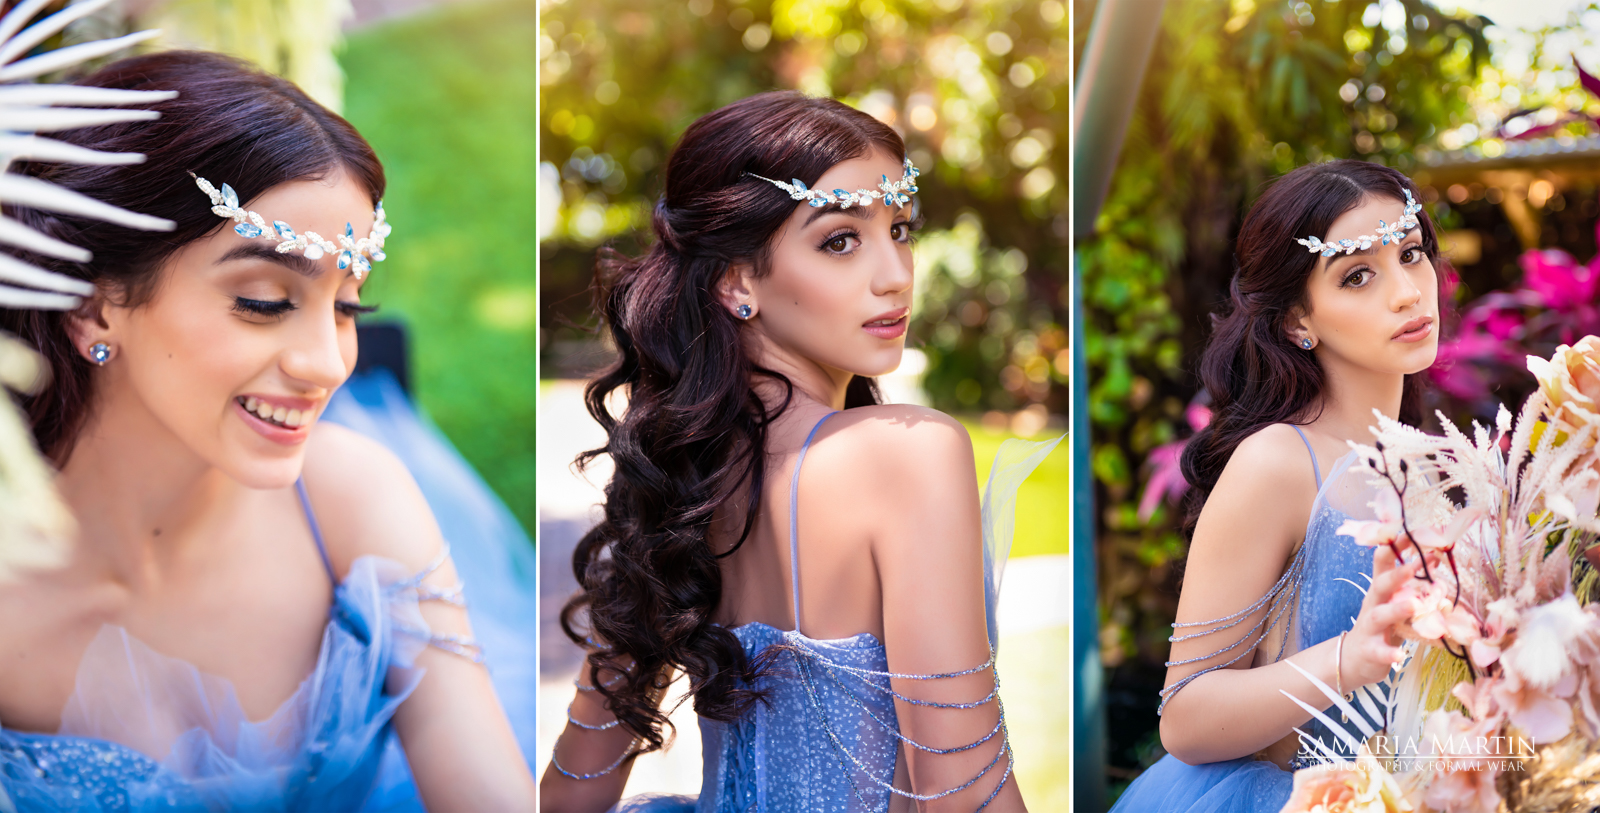 quinceanera princess dresses, princess inspired quince dresses,photographer for quinceanera